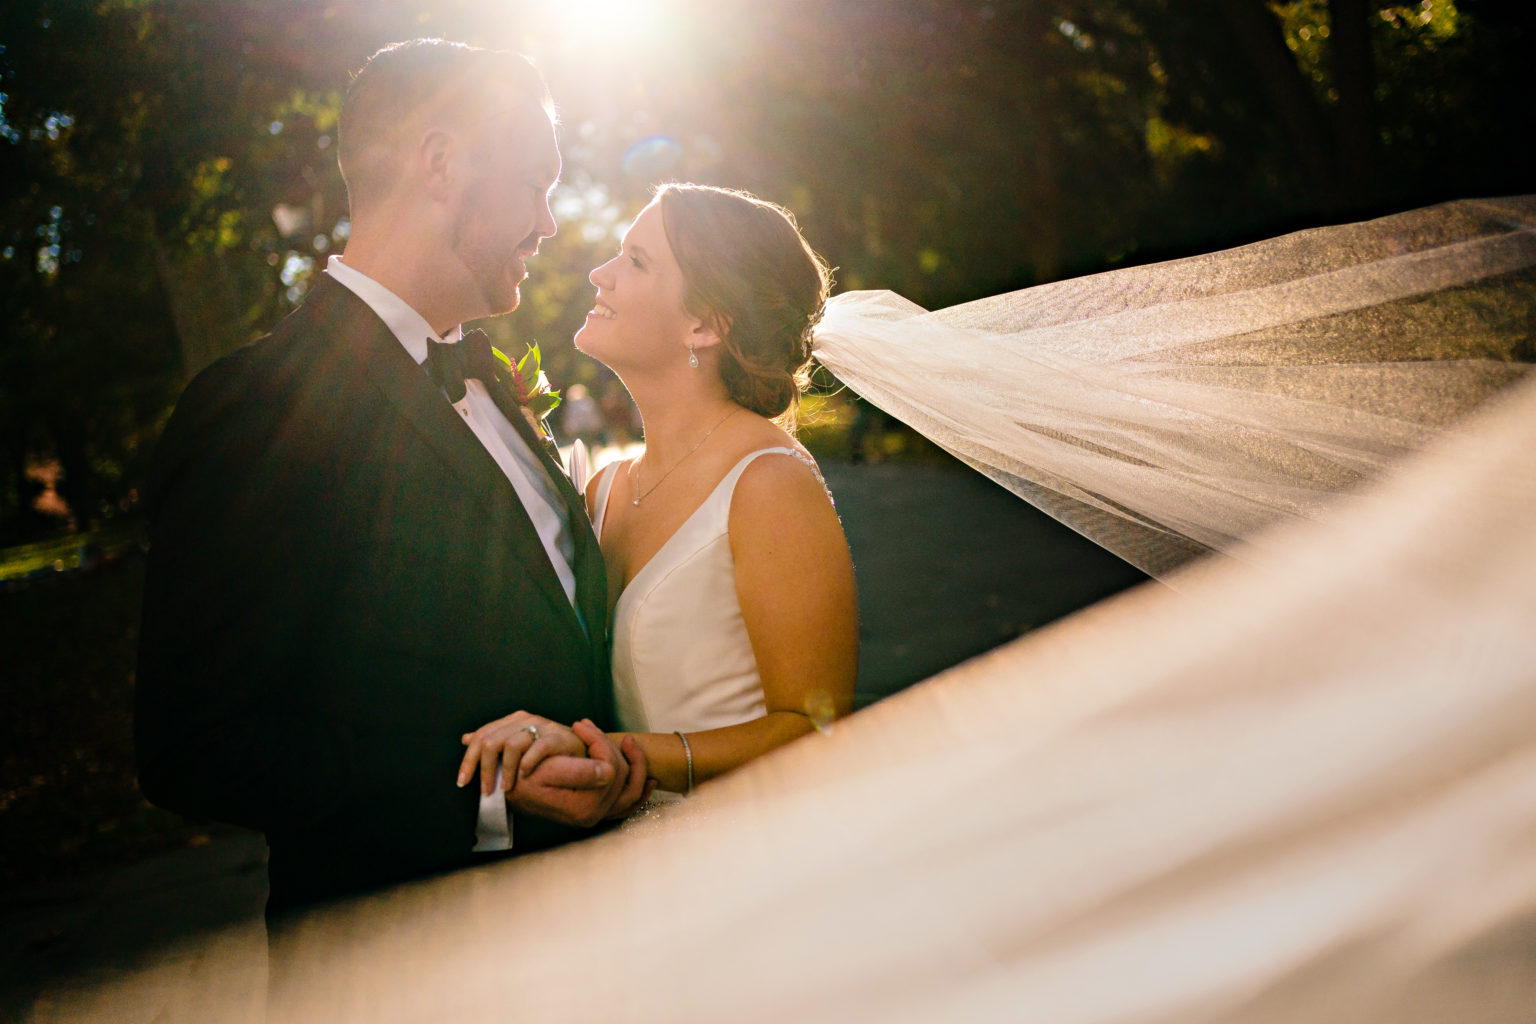 Bride and groom hug each other with warm sun flare behind them while bride's cathedral length veil flys around them.